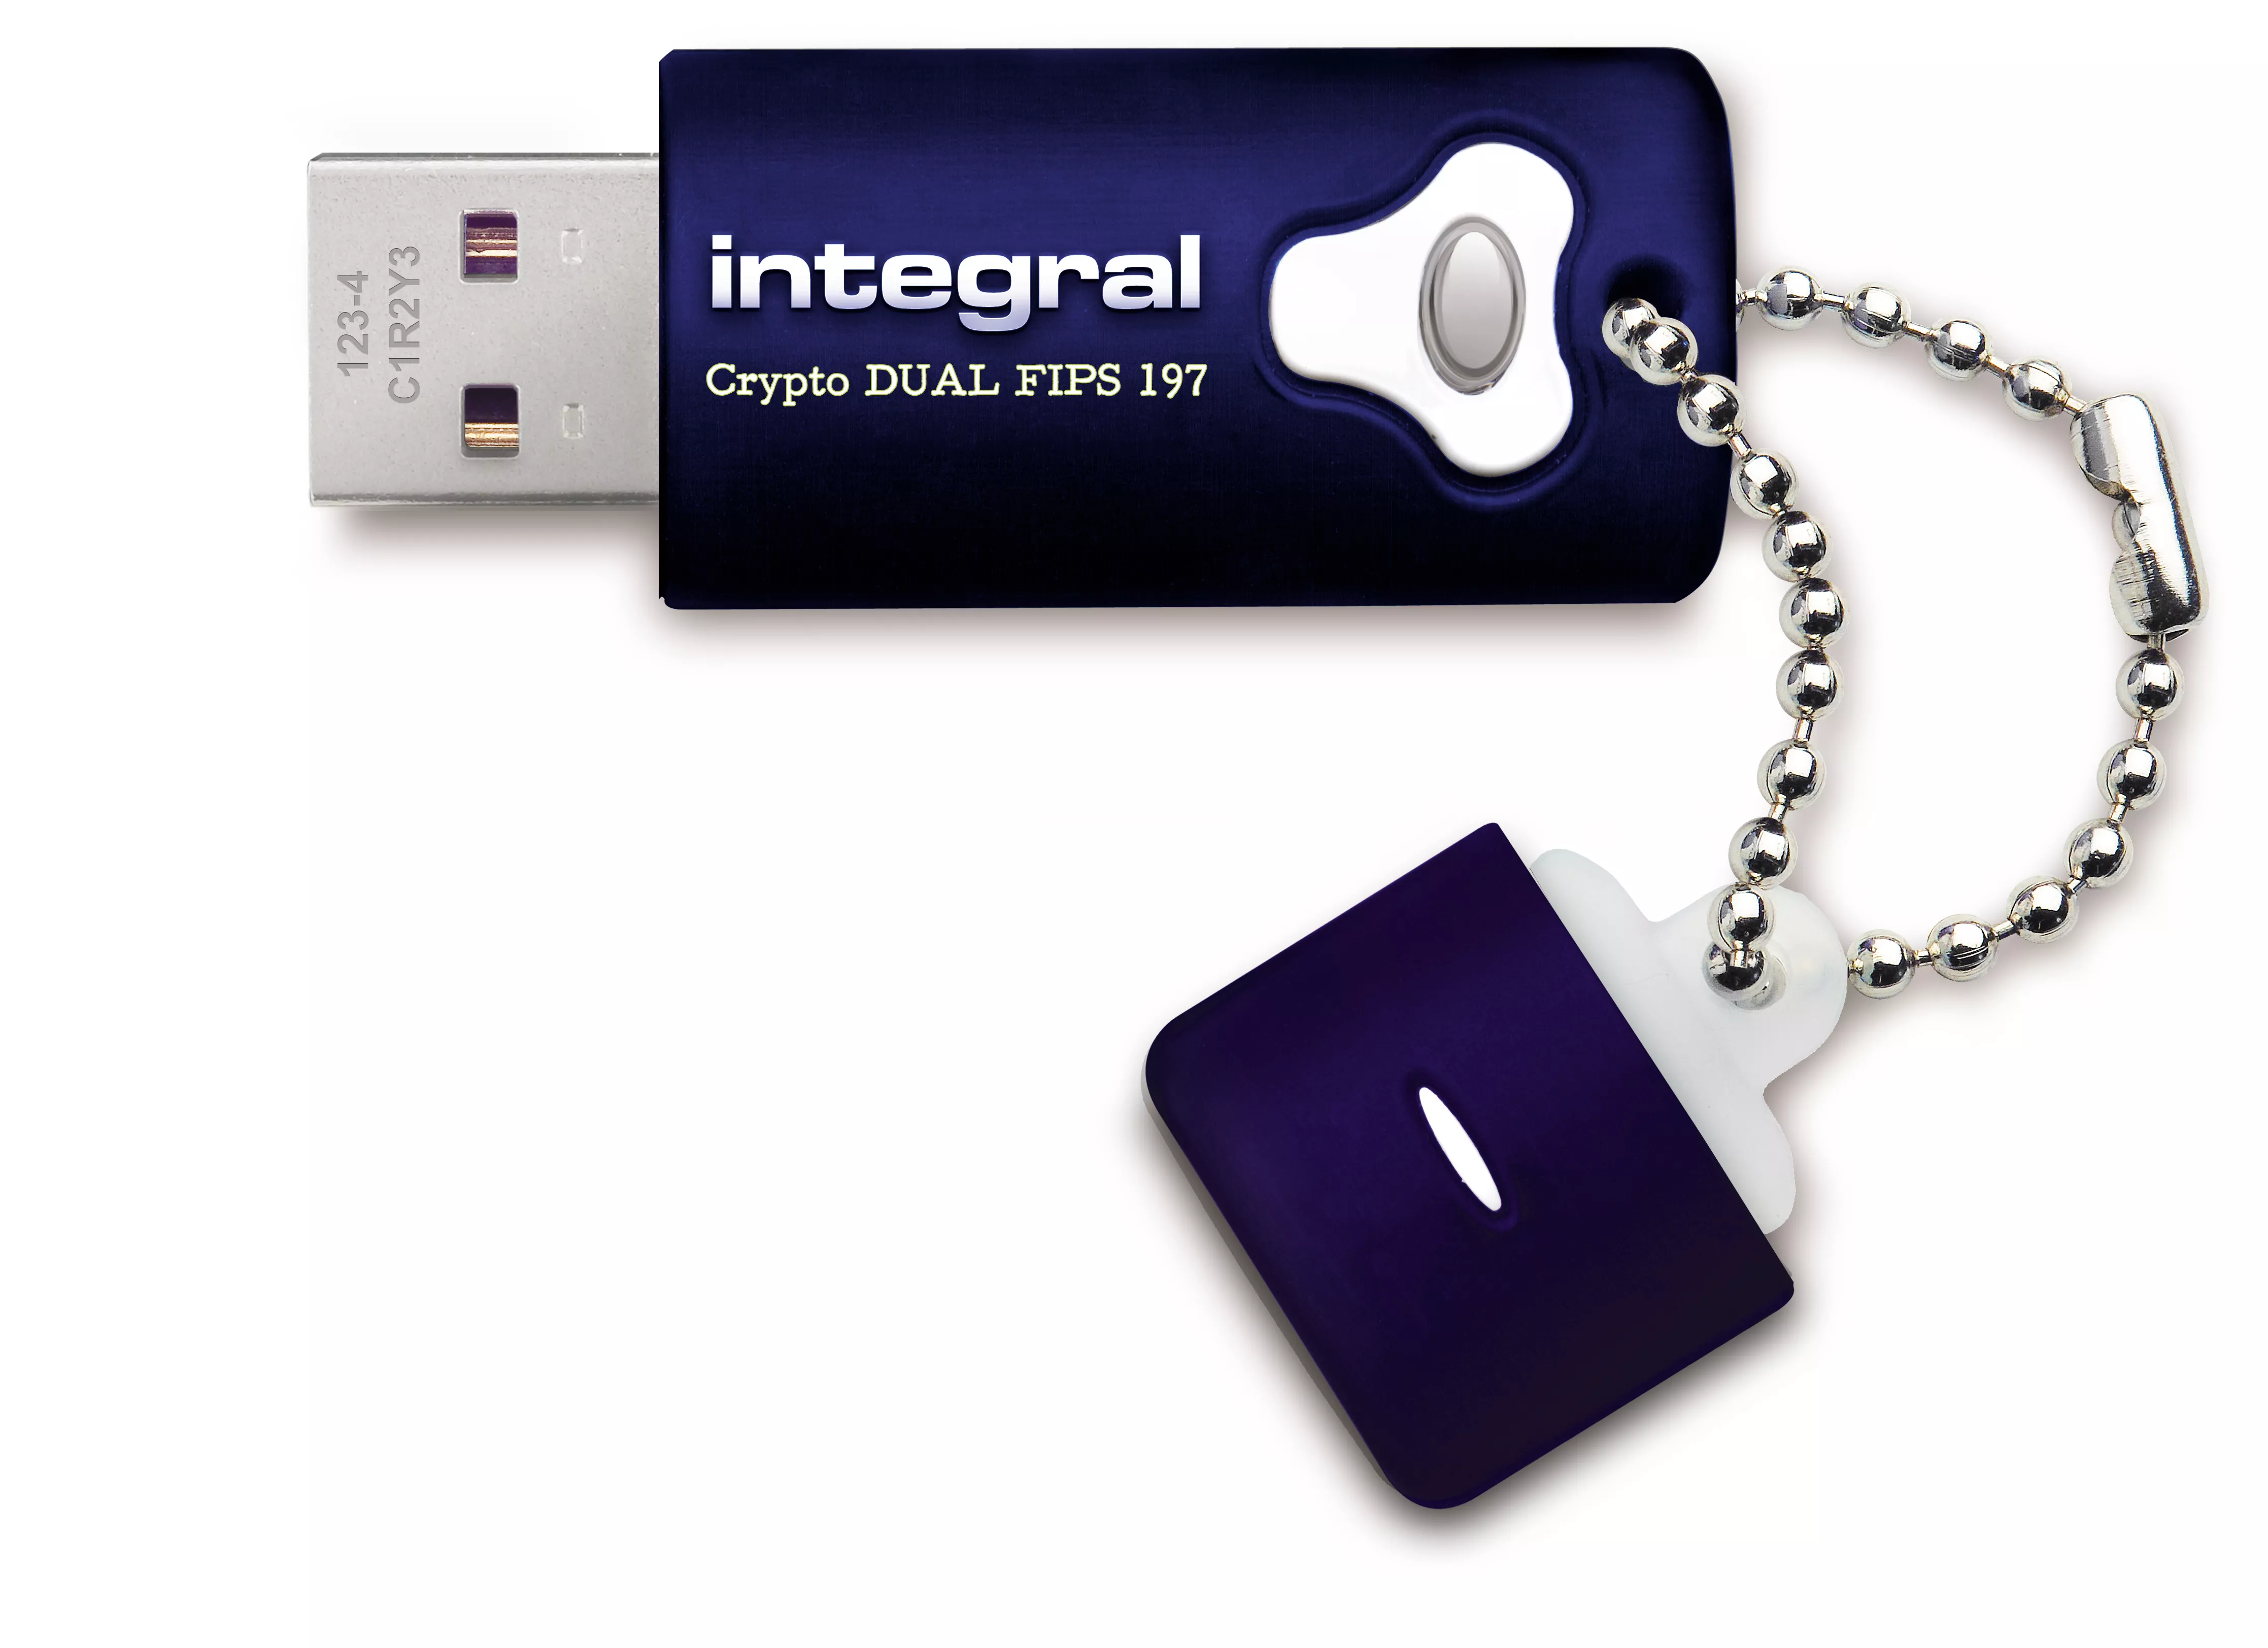 Achat Adaptateur stockage Integral 16GB Crypto Dual FIPS 197 Encrypted USB 3.0 sur hello RSE